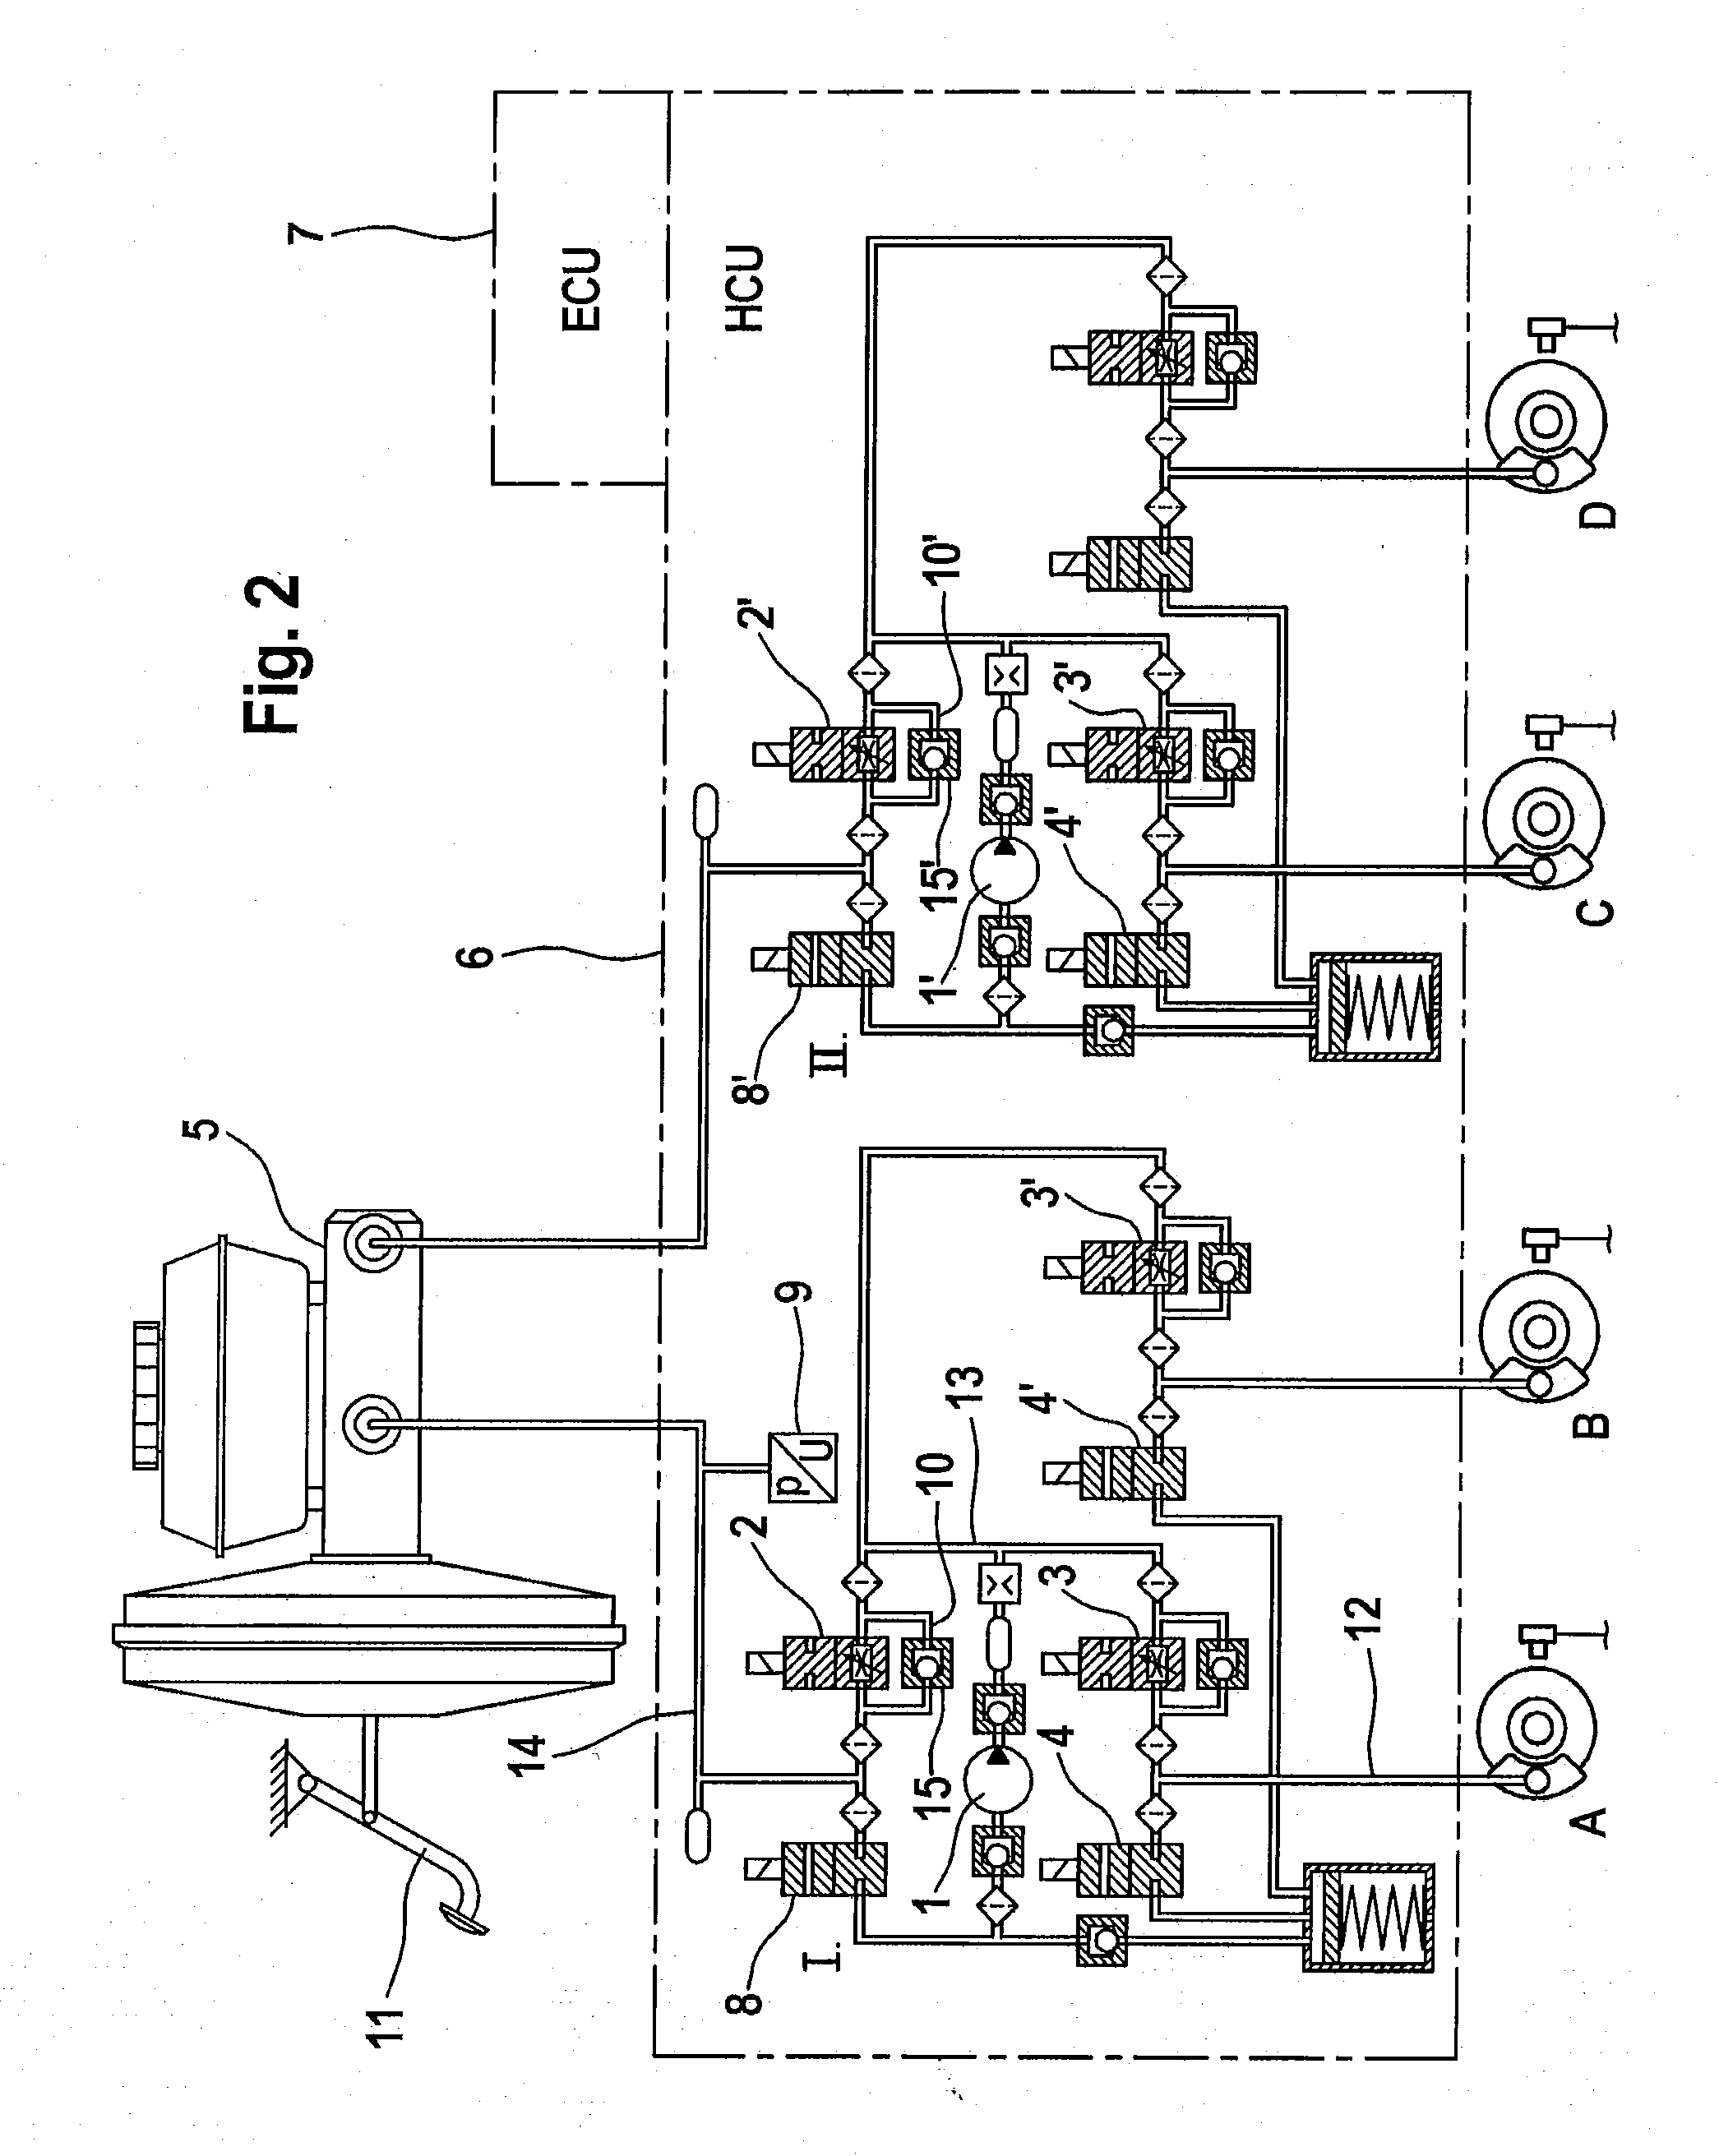 Method for conditioning a control valve